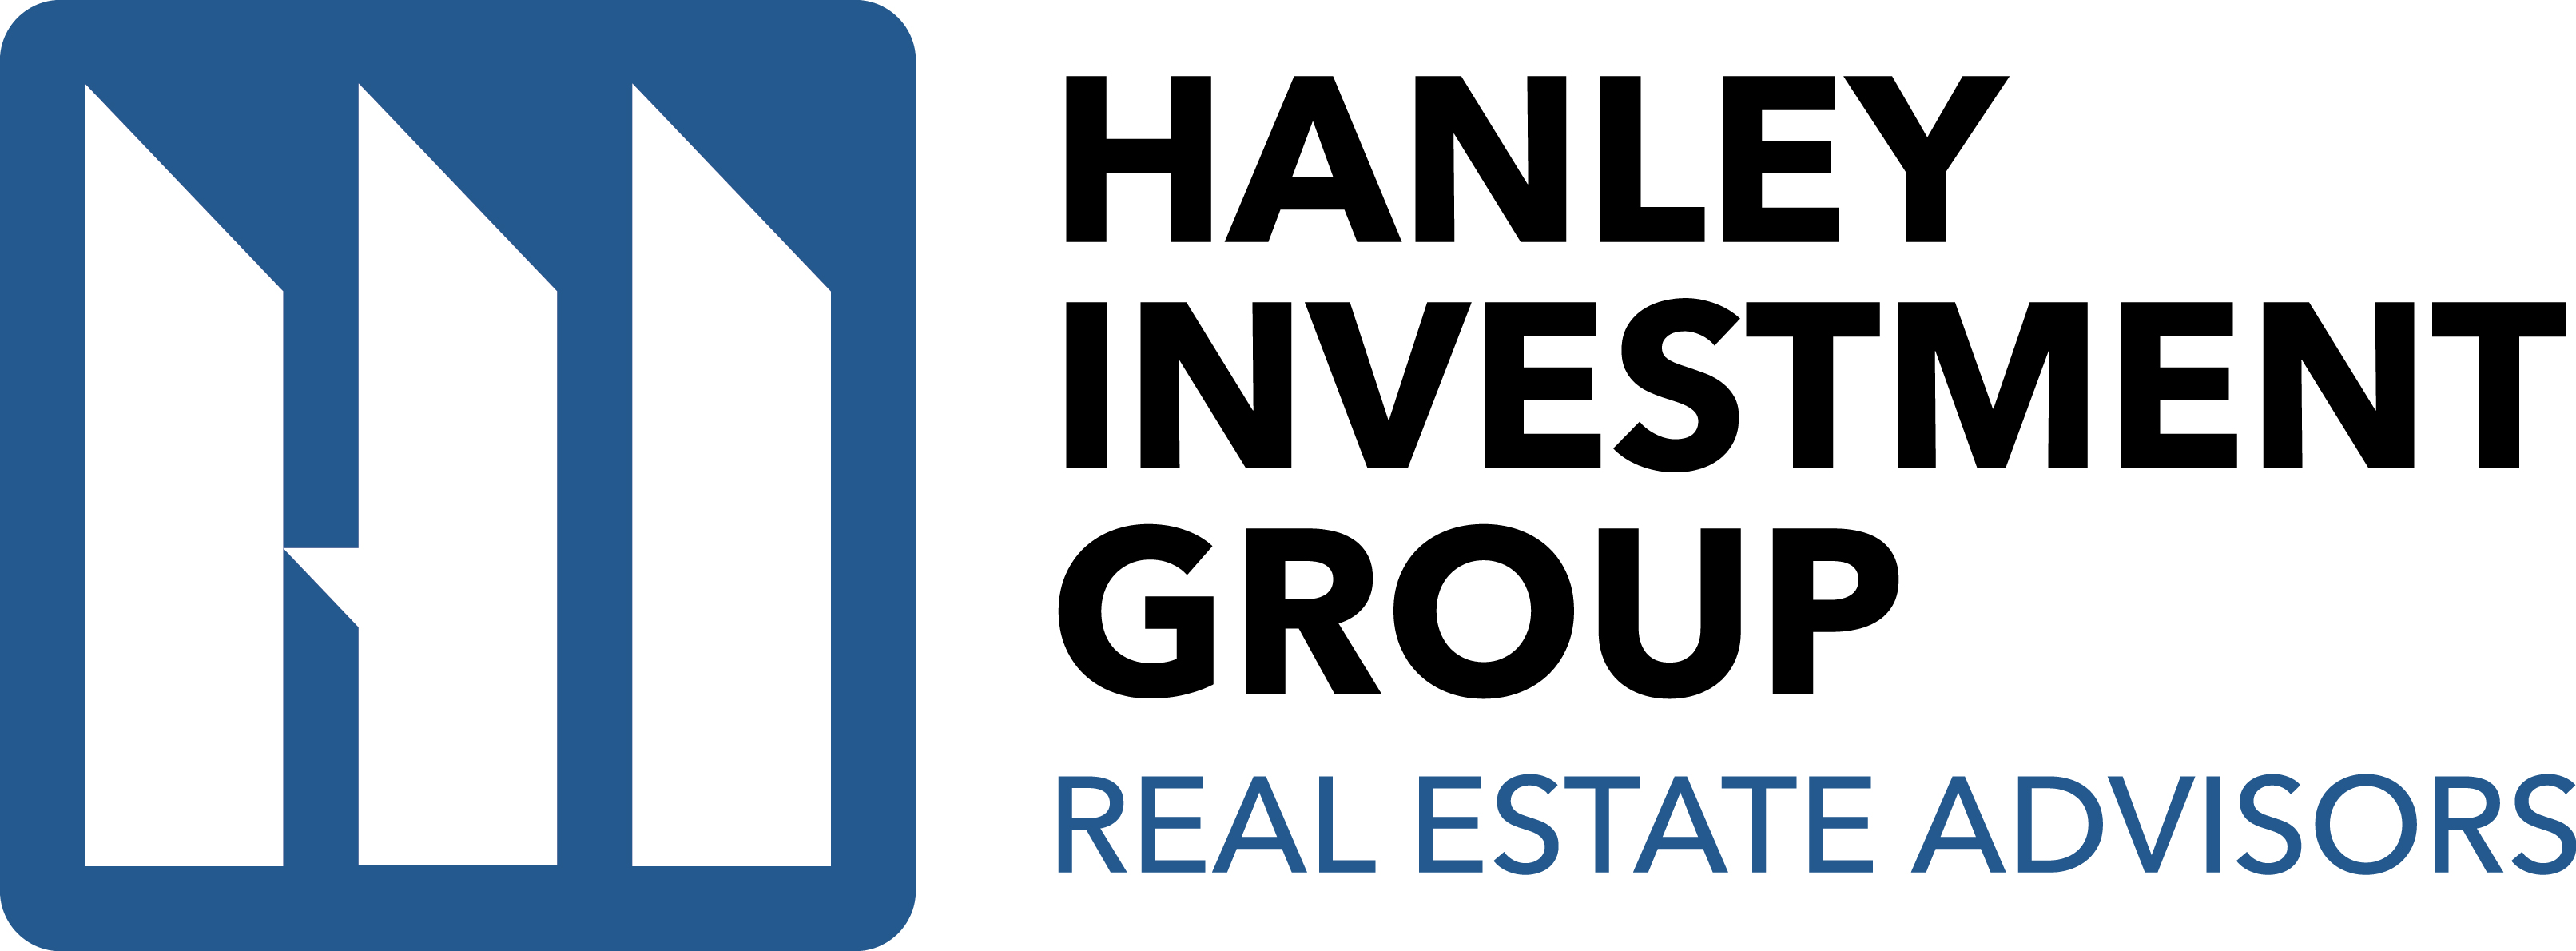 Hanley Investment Group Reports Record Number of Transactions and Sales Volume in the First Half of 2022